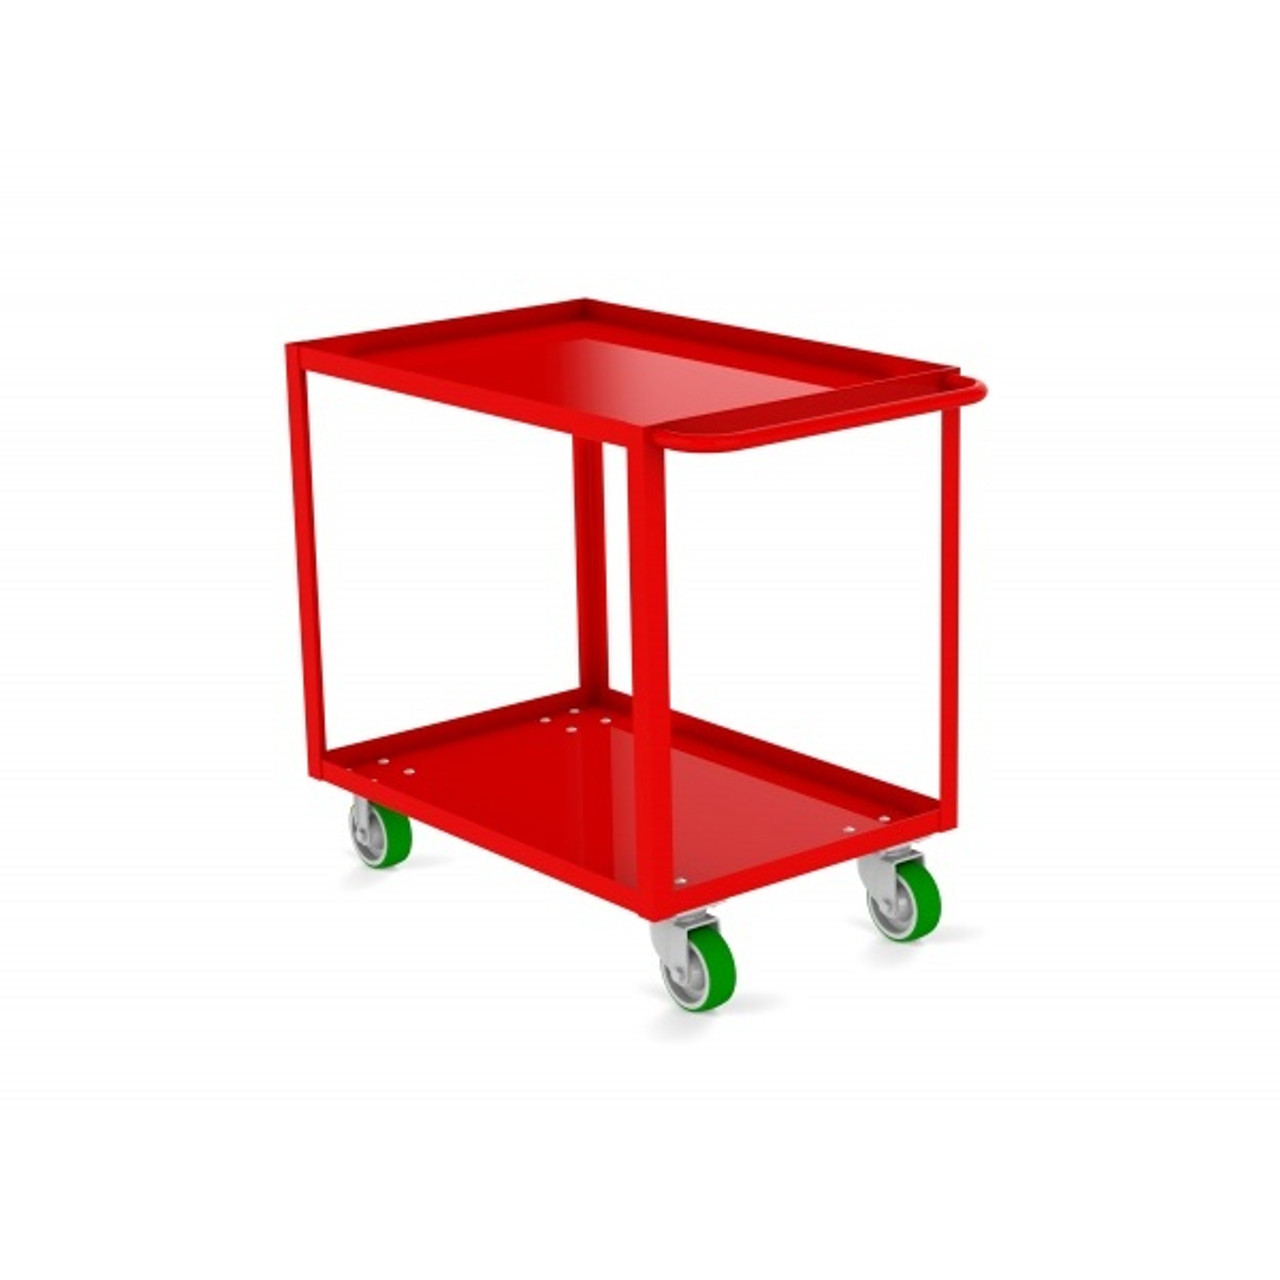 Valley Craft Two Shelf 30 x 60" Utility Cart, Red with Poly Casters (CALL FOR BEST PRICING)